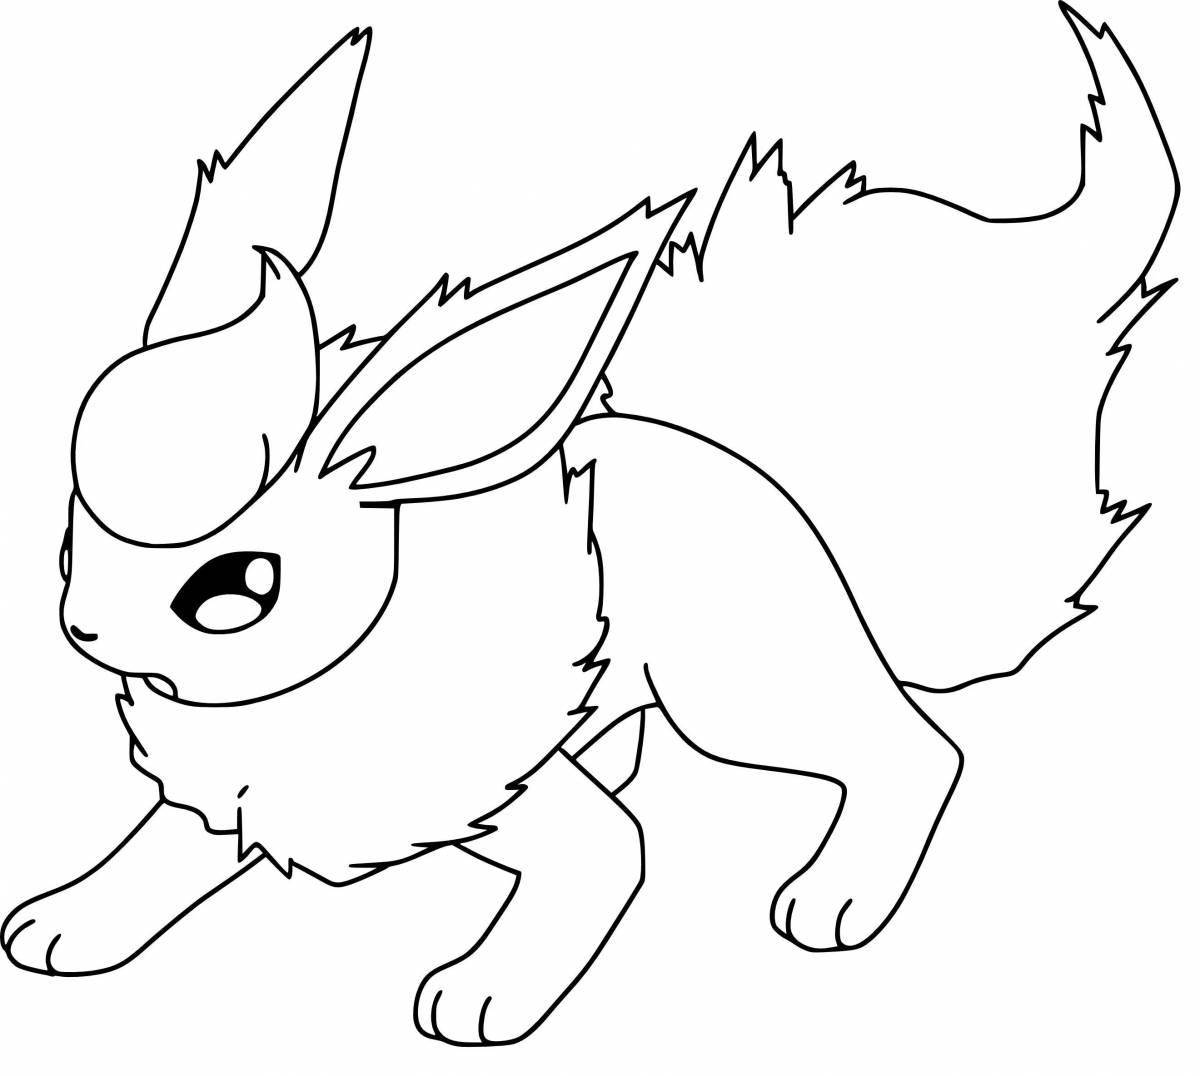 Colorful playful eevie coloring page